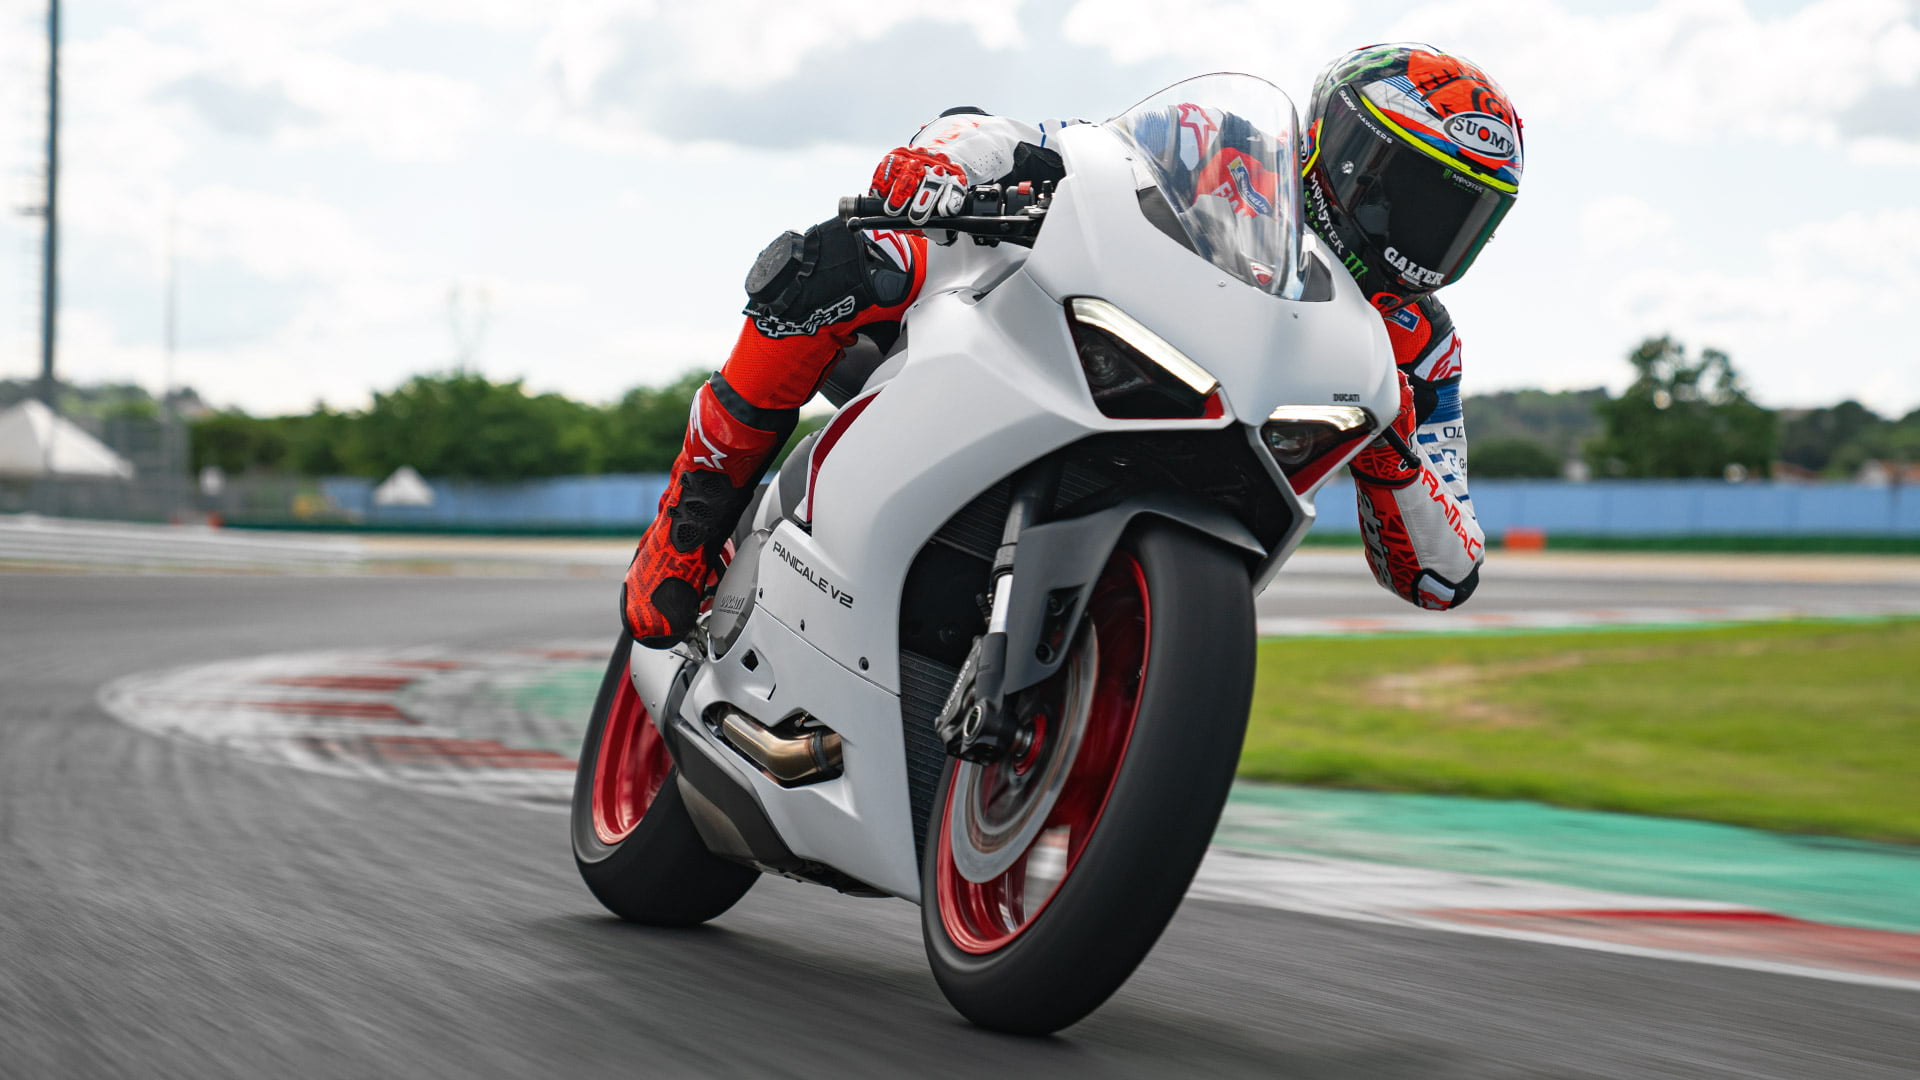 Ducati Panigale V series Power bike series with Racing DNA